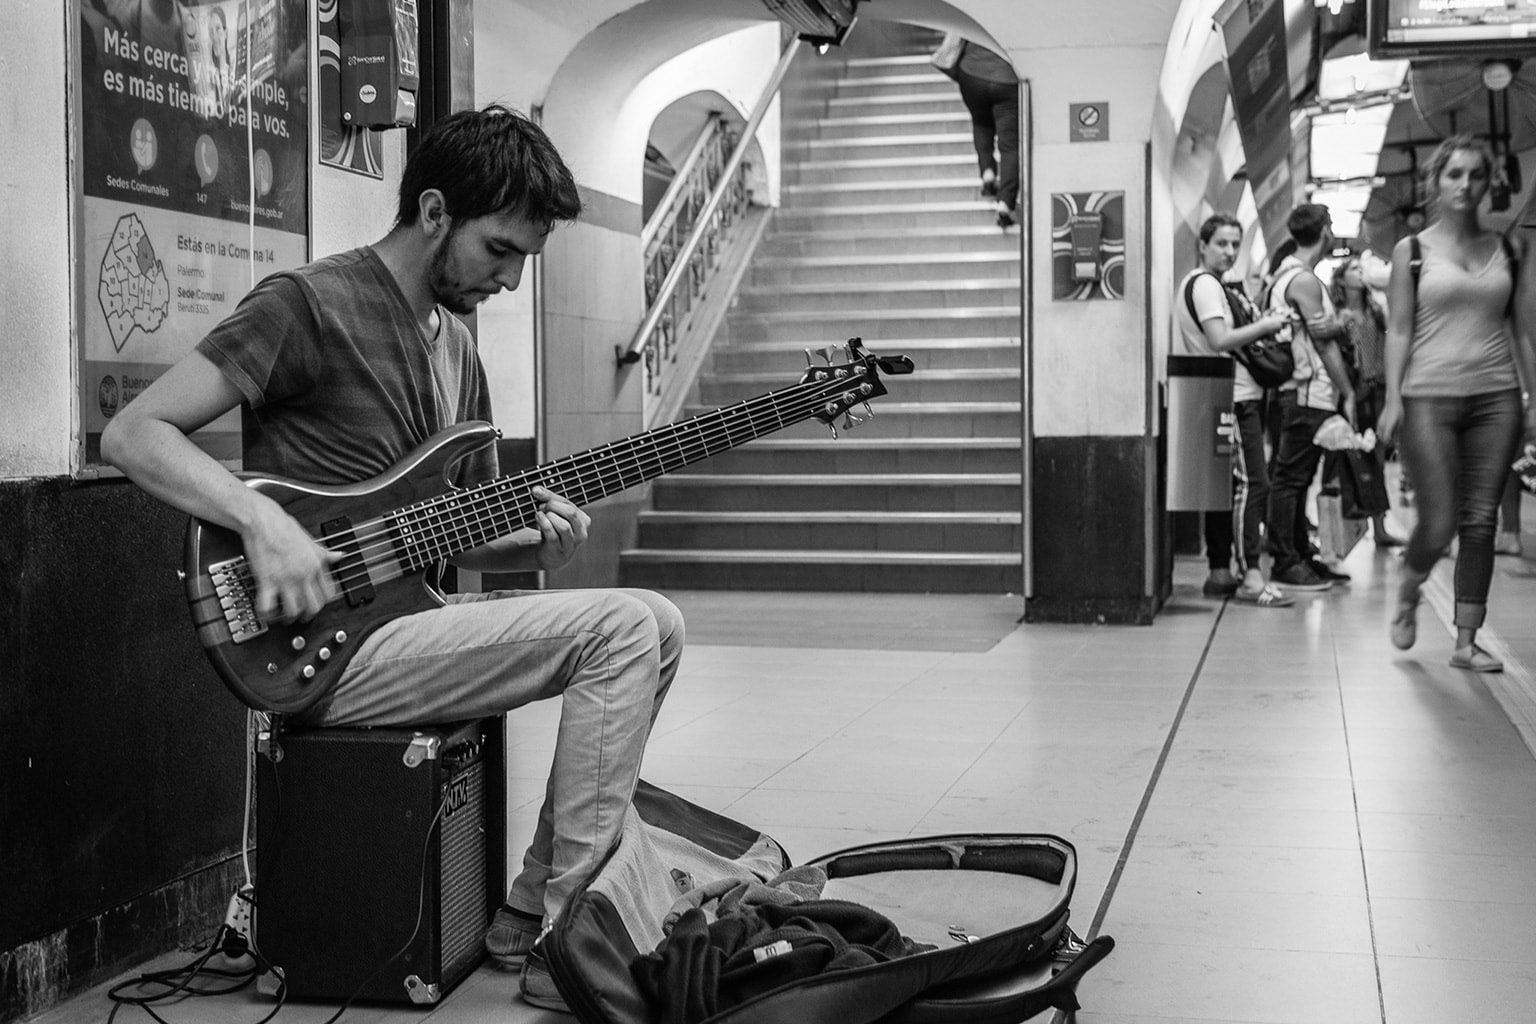 Raphael: 26 years old, Colombian, currently lives in Buenos Aires. <br> He came to do a postgraduate with an Argentine professor. Musician, he plays the bass of 6 strings like the gods, he interprets covers with his very particular and harmonious imprint. <br> Playing his music in subways and bars pays for his studies.
